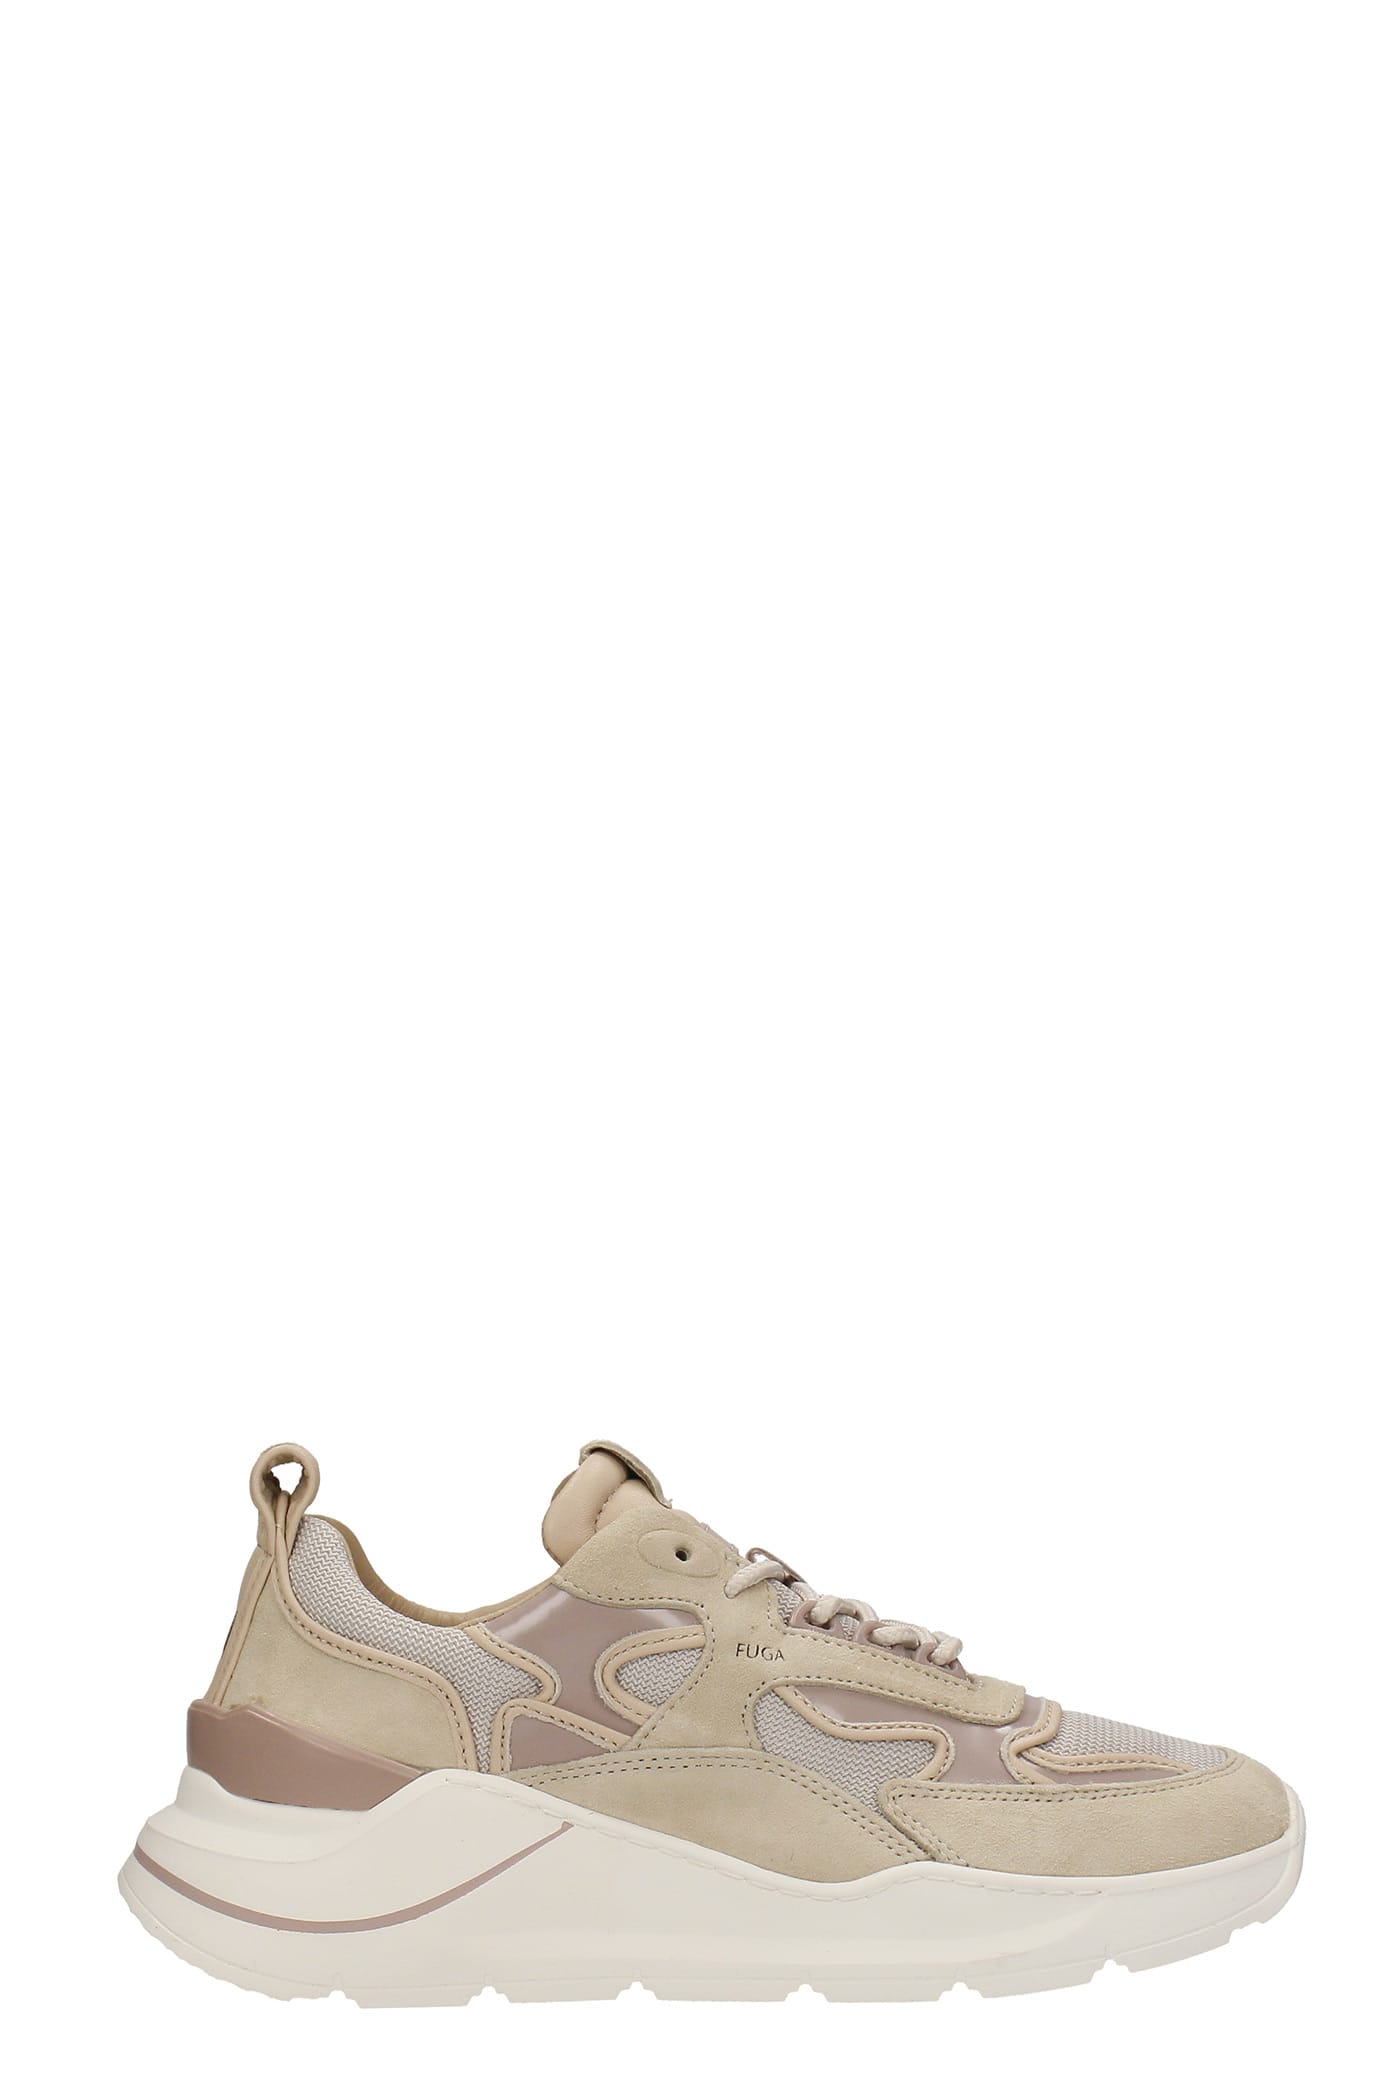 D.A.T.E. Fuga 2.0 Sneakers In Beige Suede And Fabric